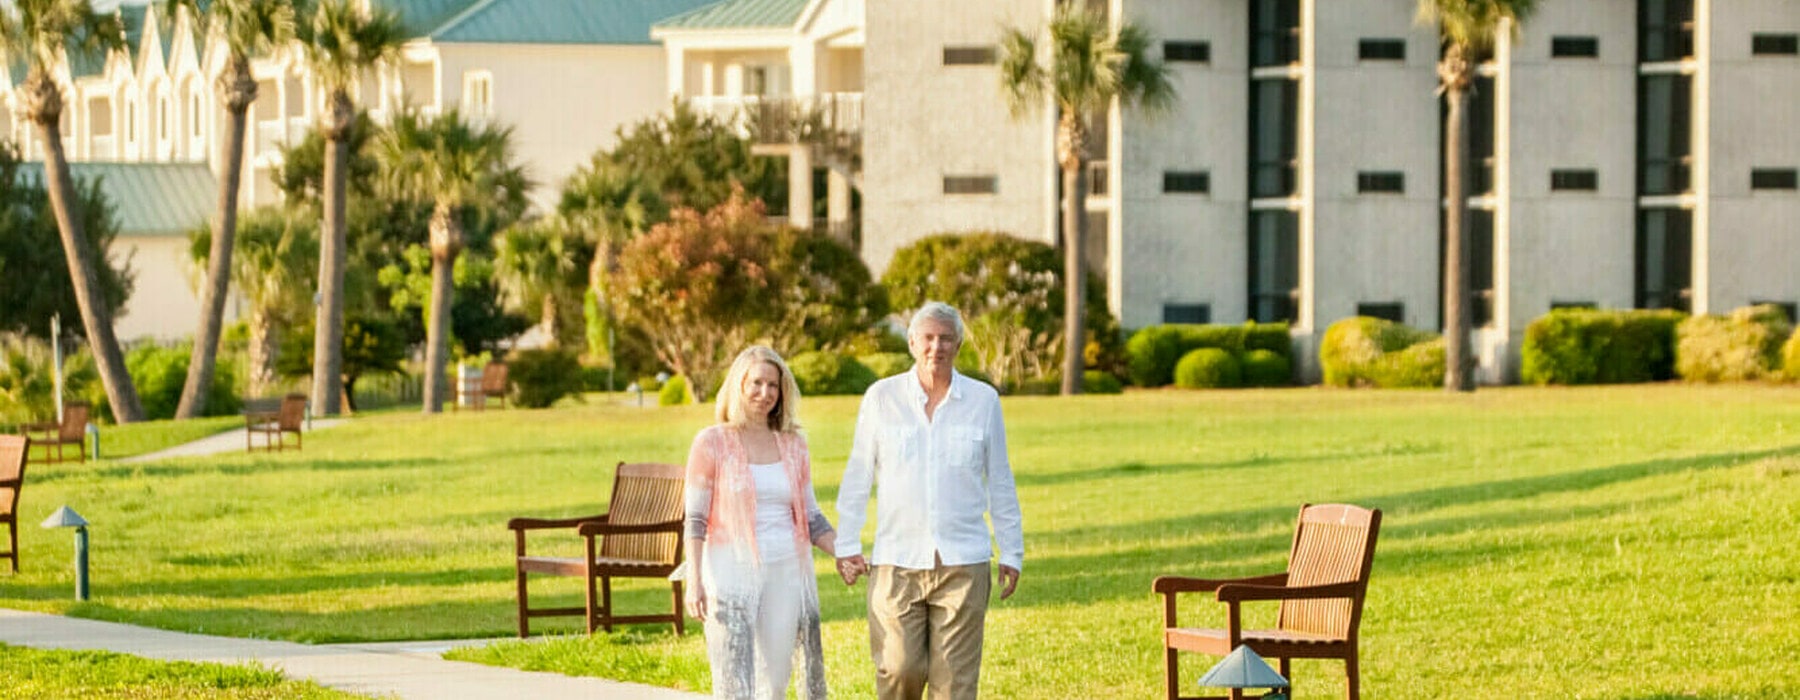 A senior couple strolls hand in hand with a retirement community in the background.